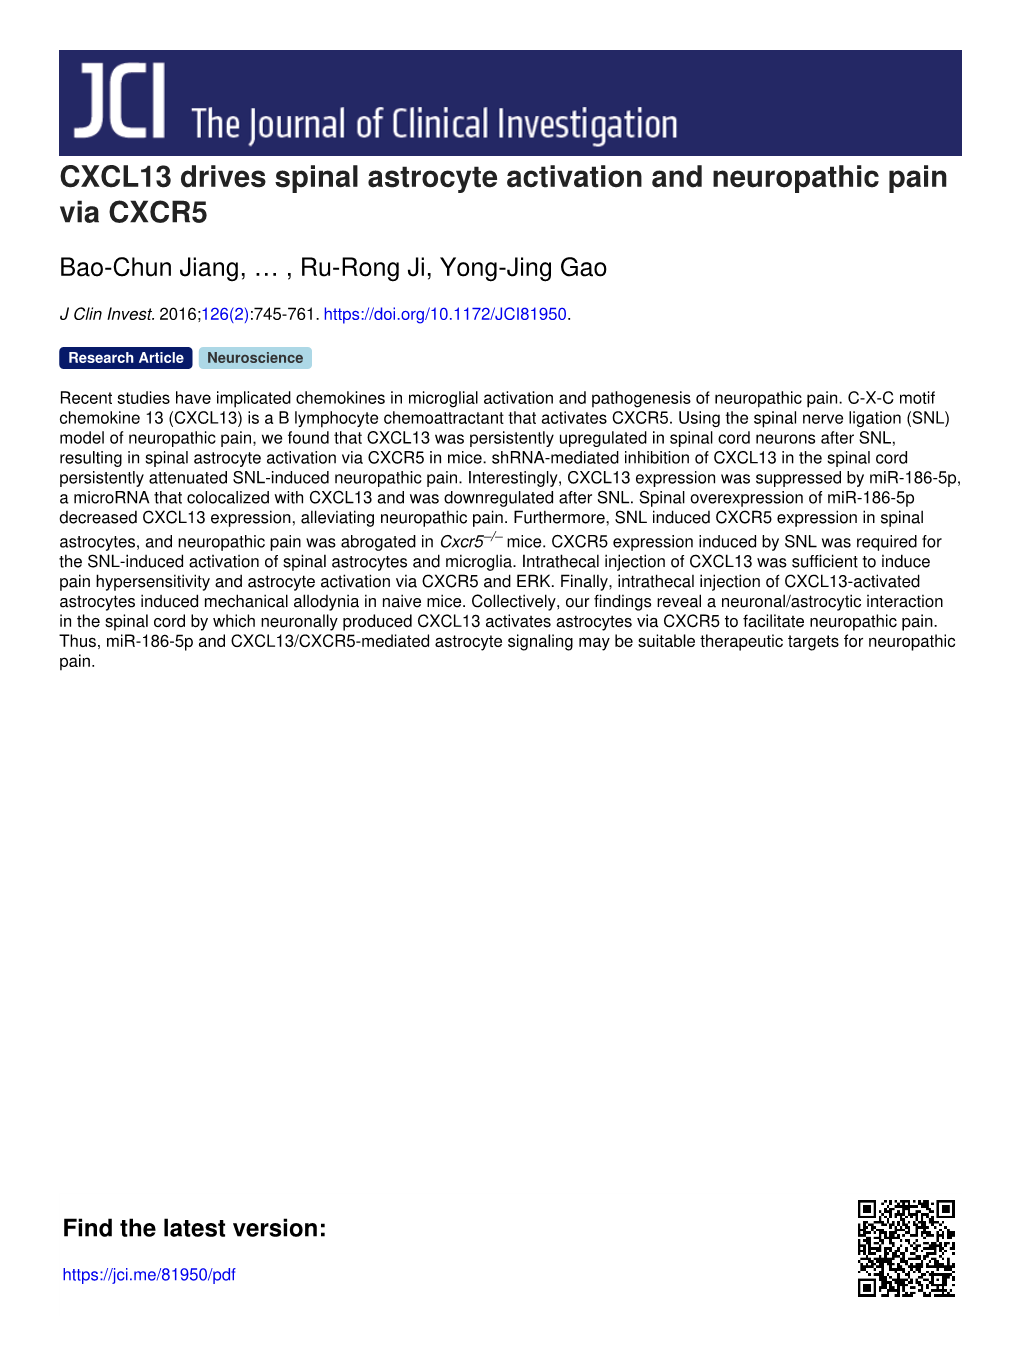 CXCL13 Drives Spinal Astrocyte Activation and Neuropathic Pain Via CXCR5